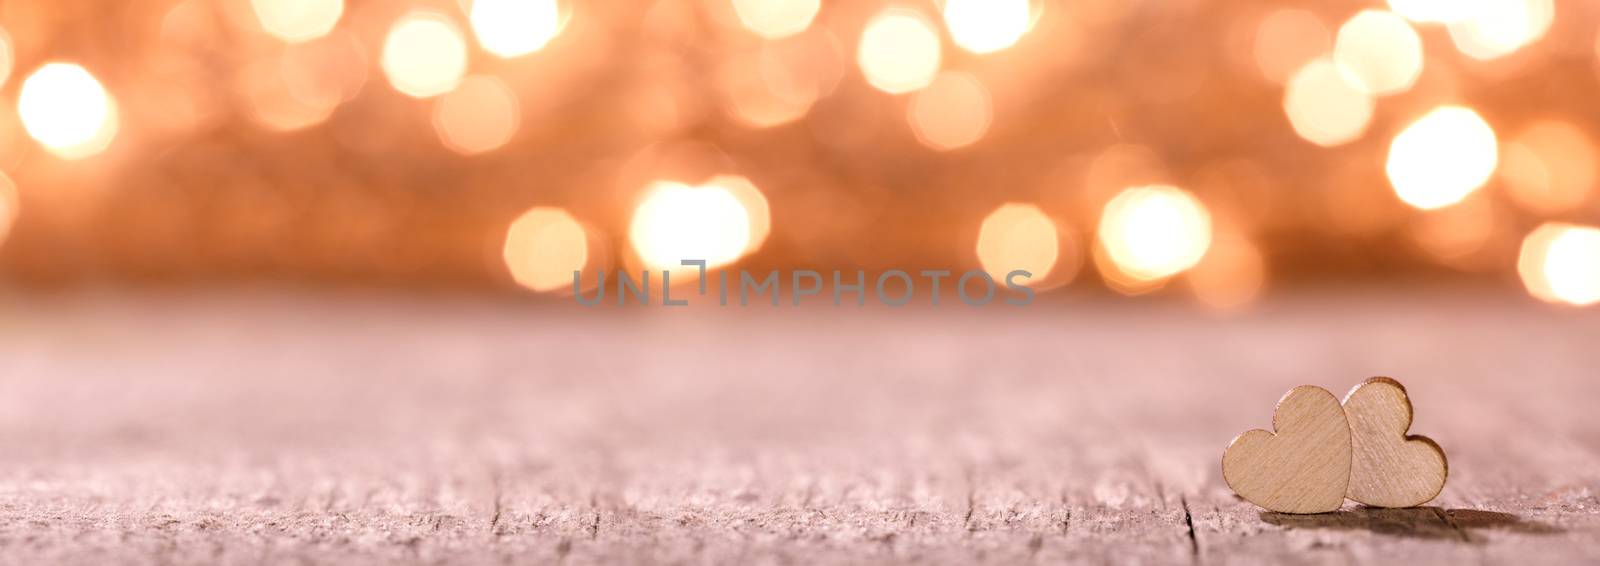 Two hearts on bokeh background by Yellowj